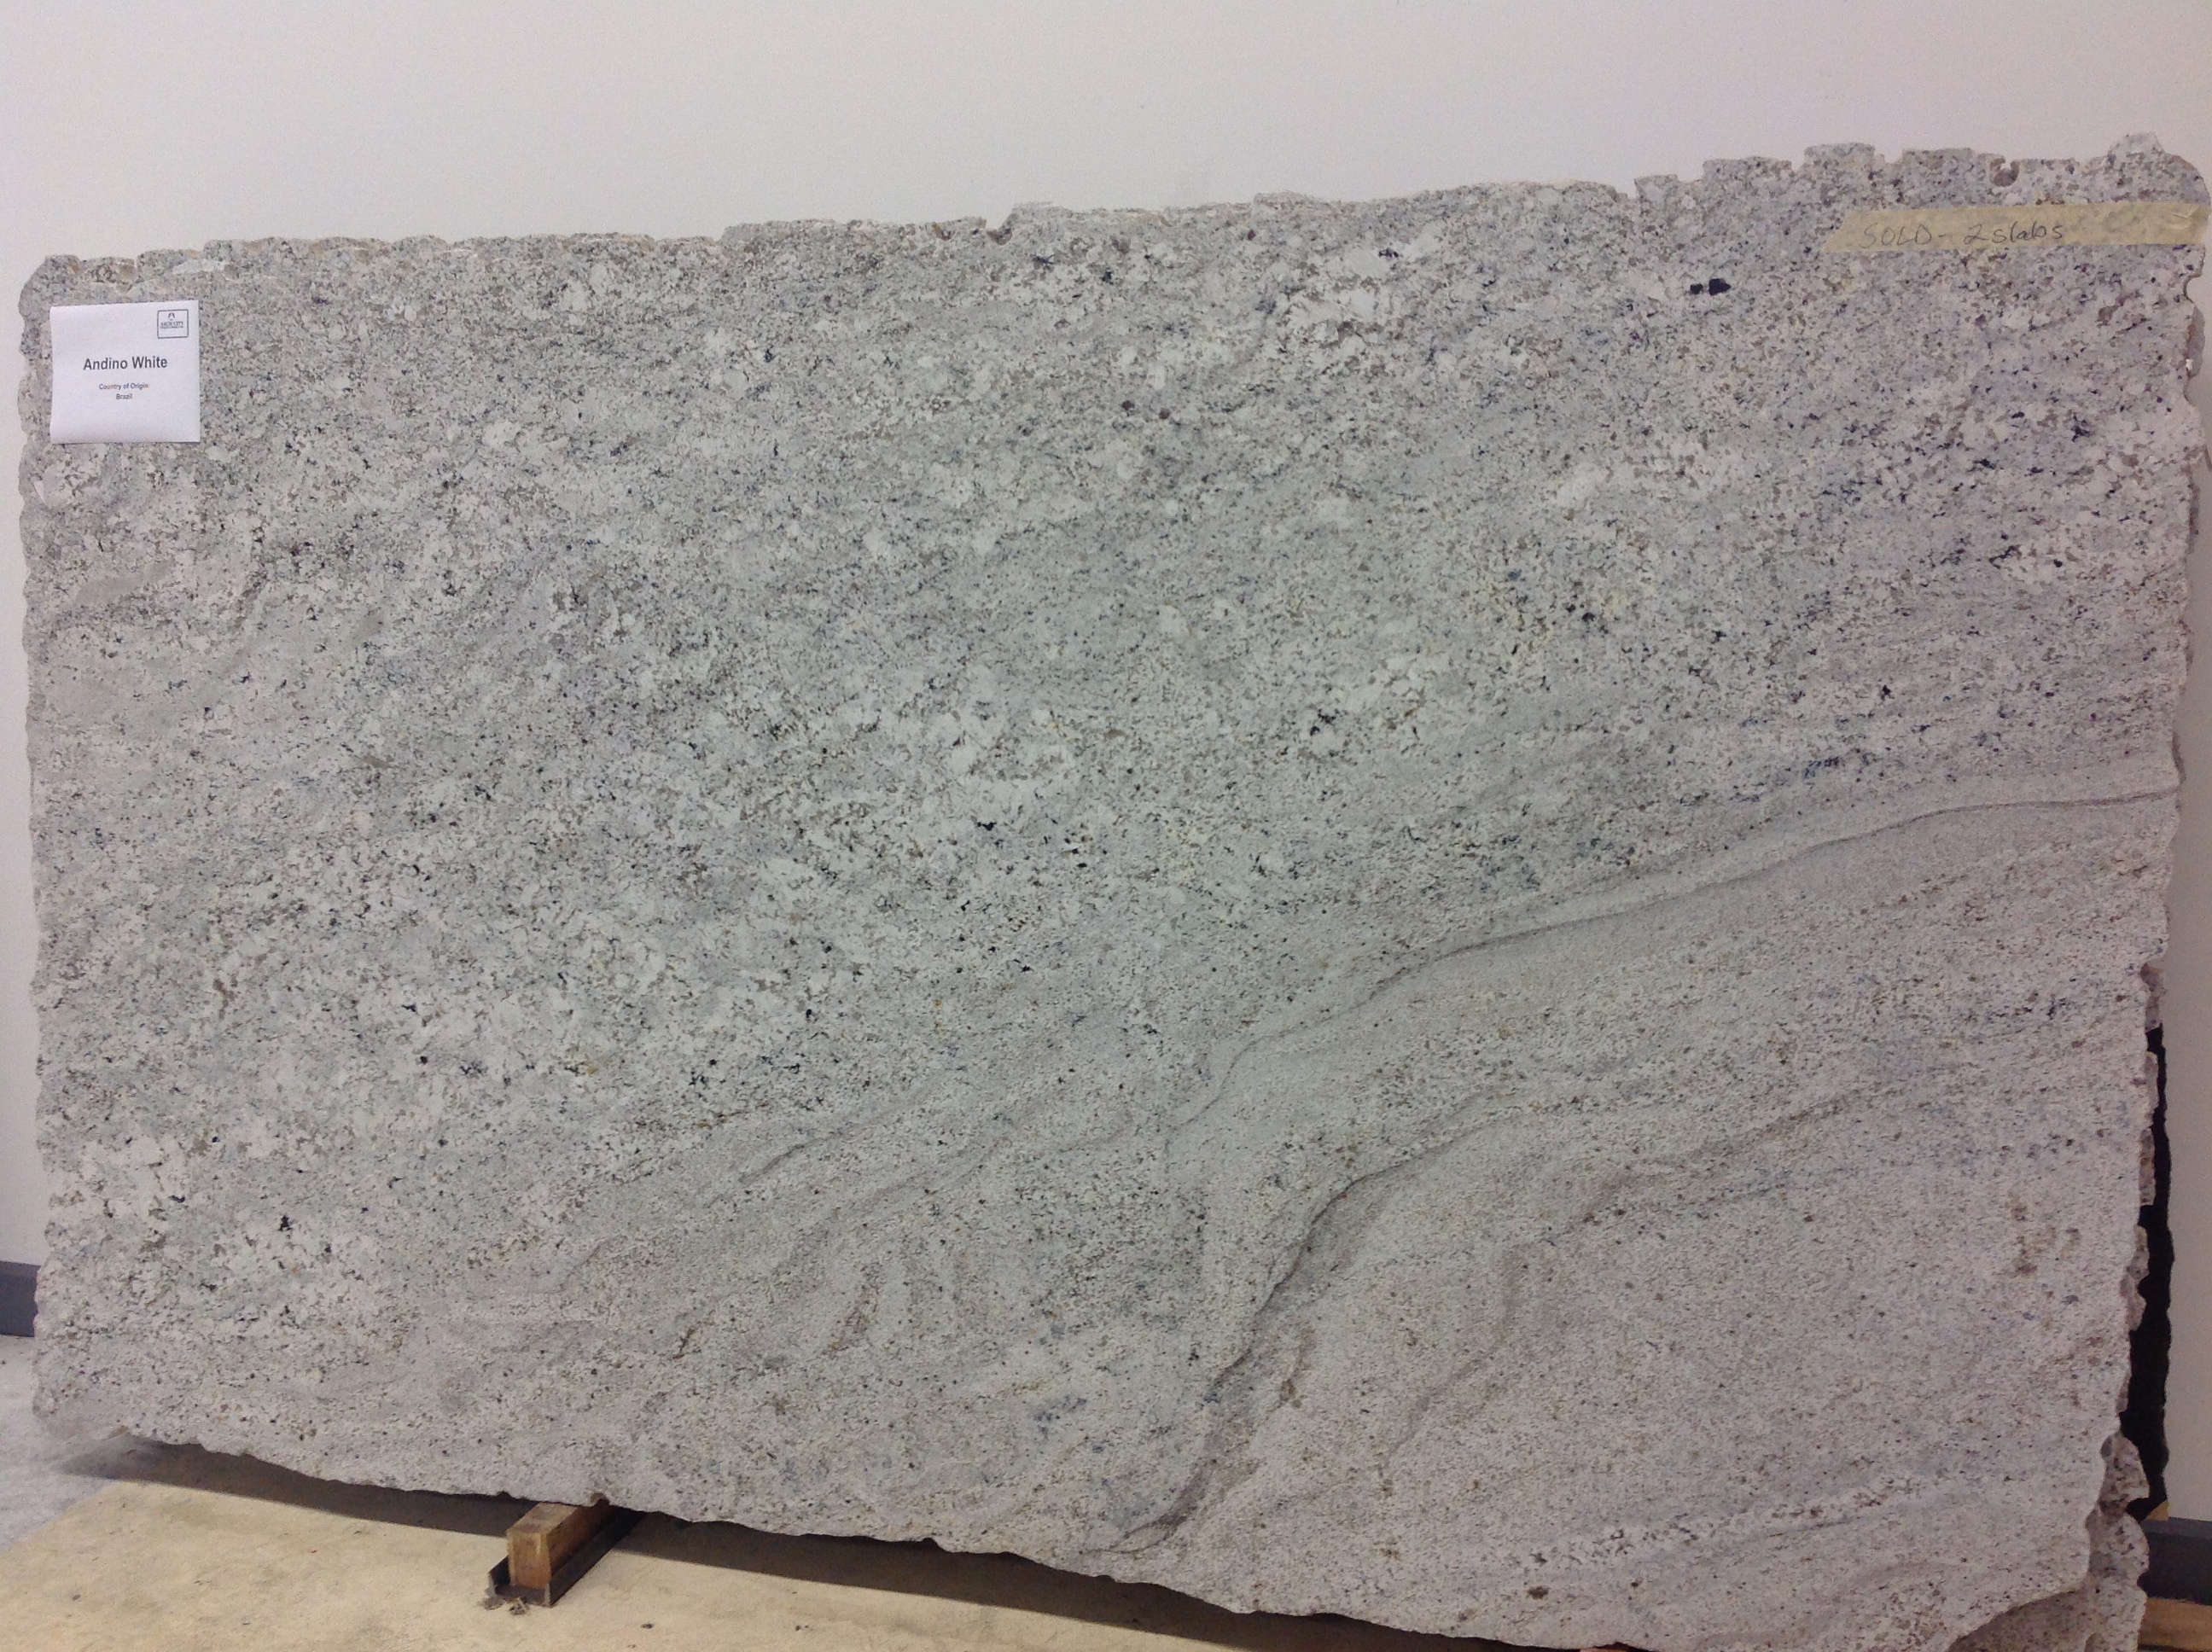 Andino White Granite: An Affordable Luxury for Kitchen Countertops